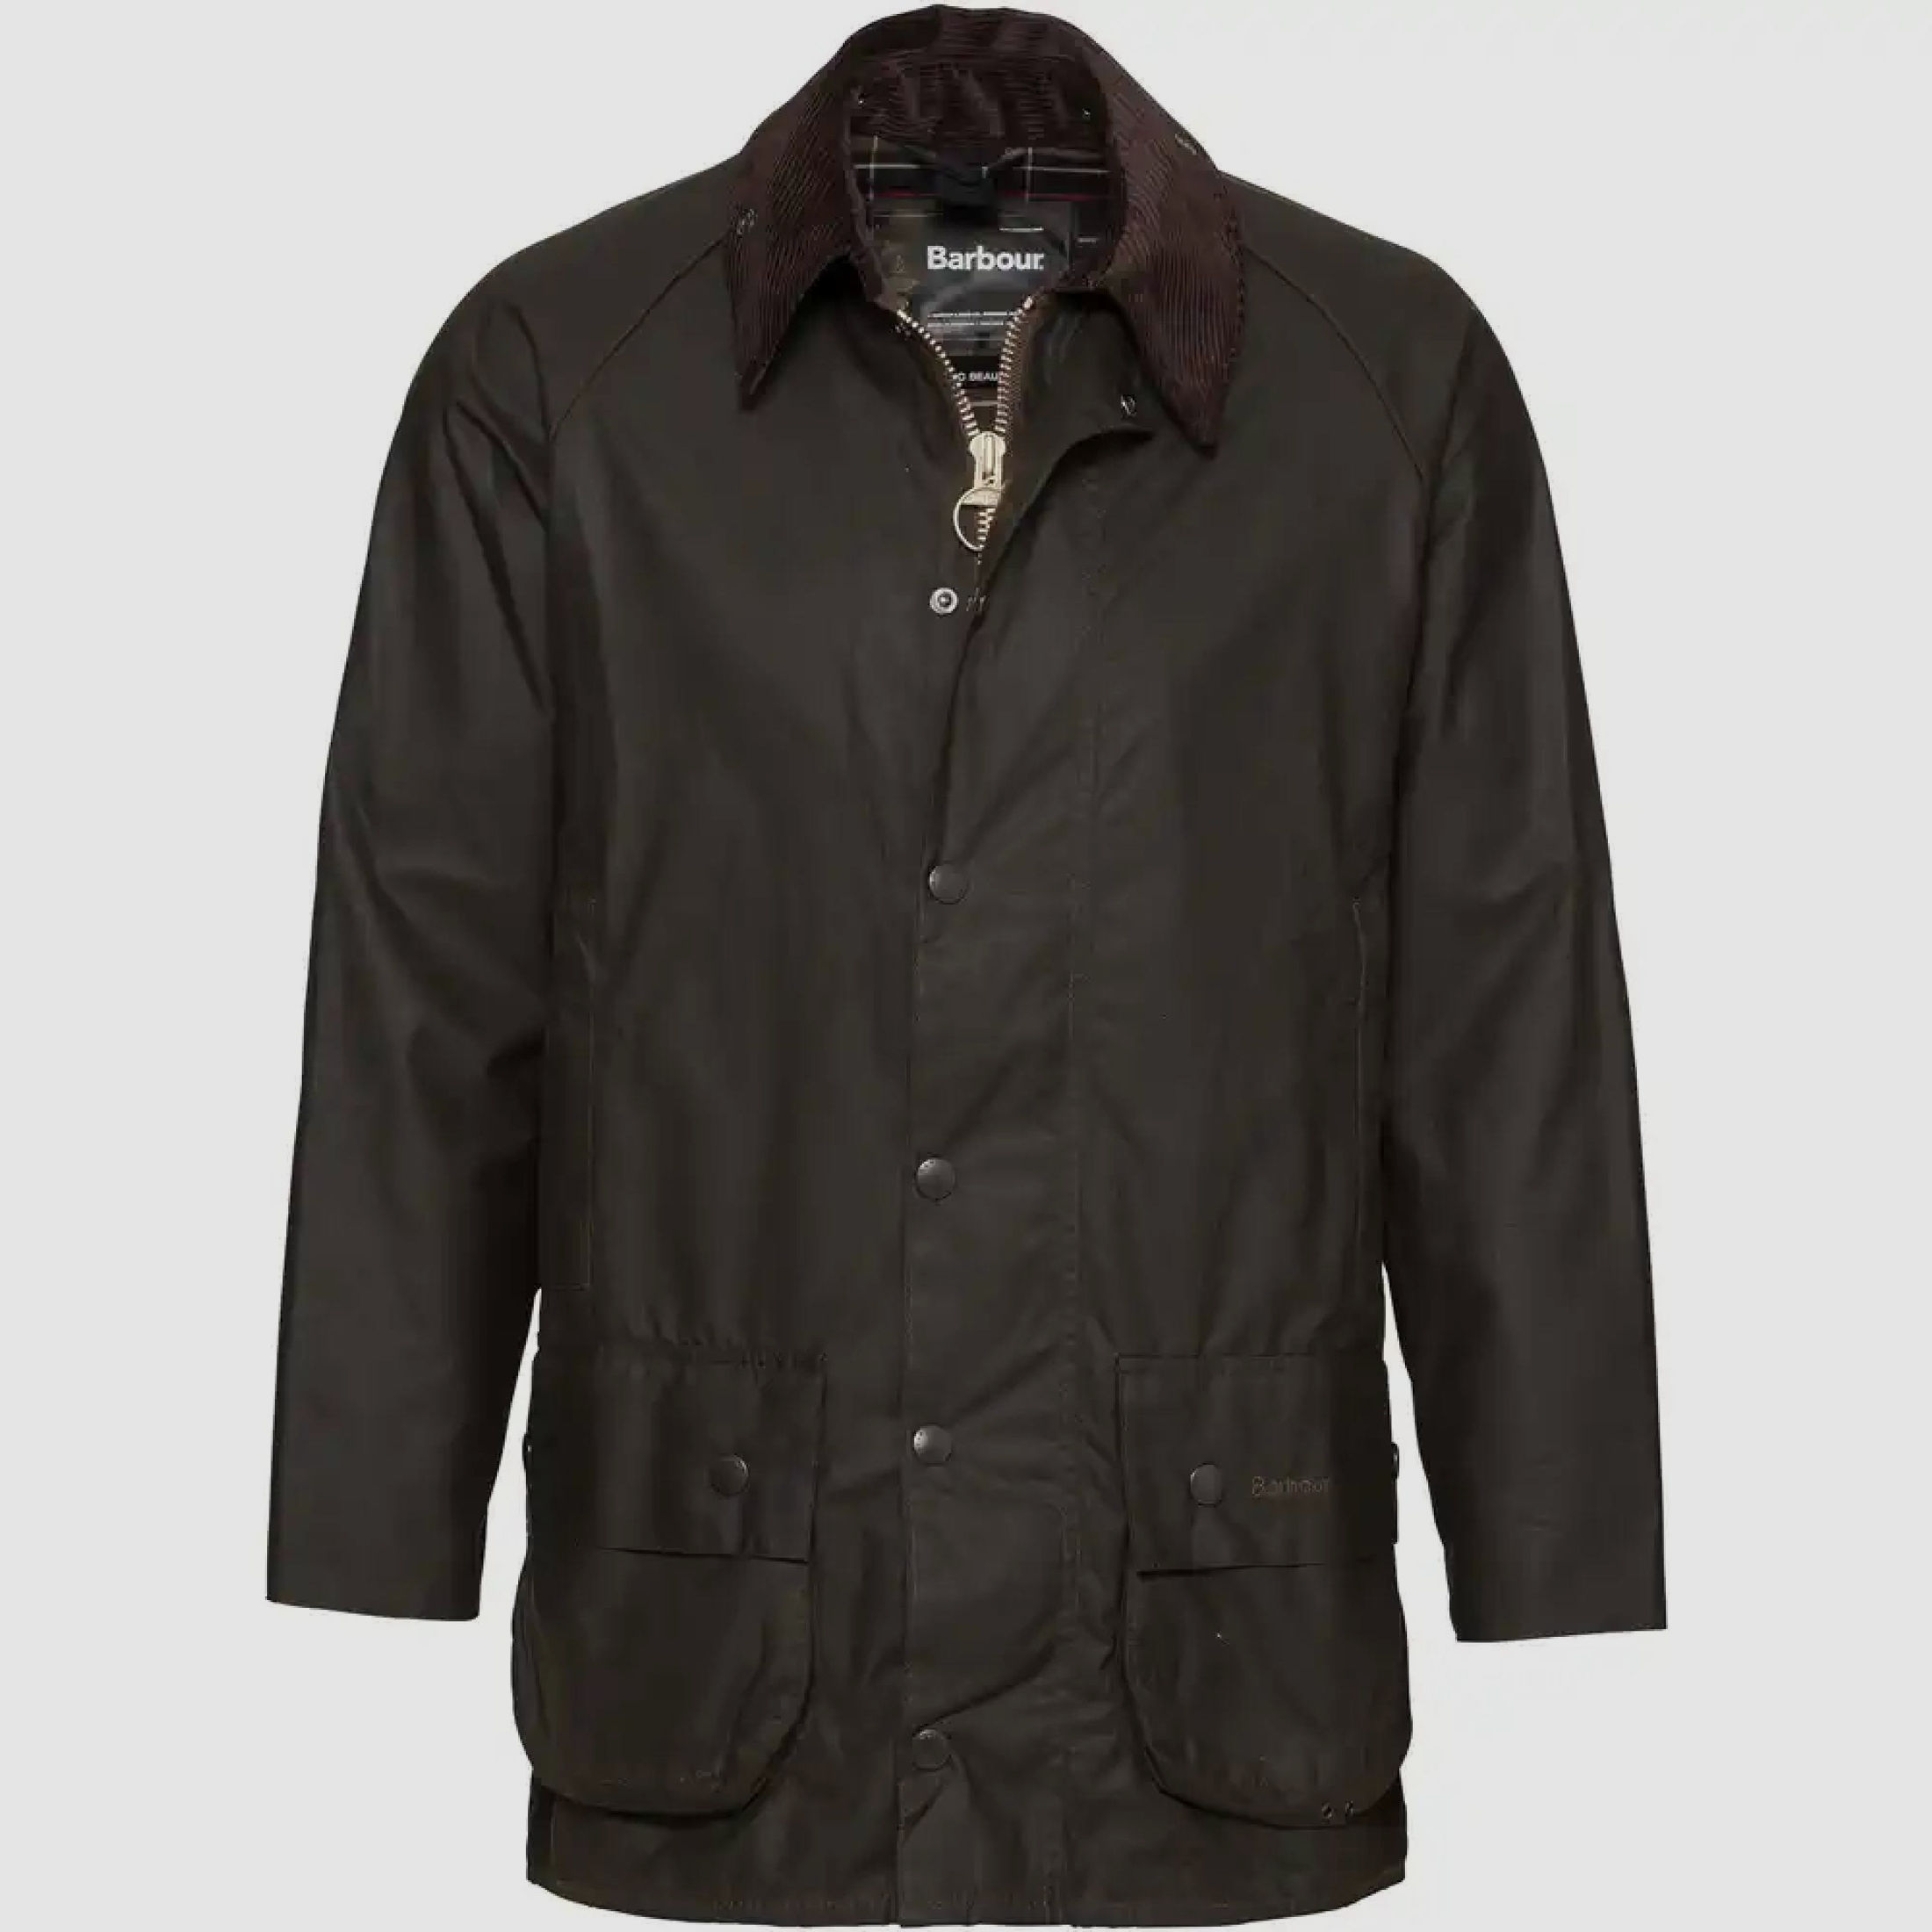 Barbour Wachsjacke Classic Beaufort, Farbe Olive 54